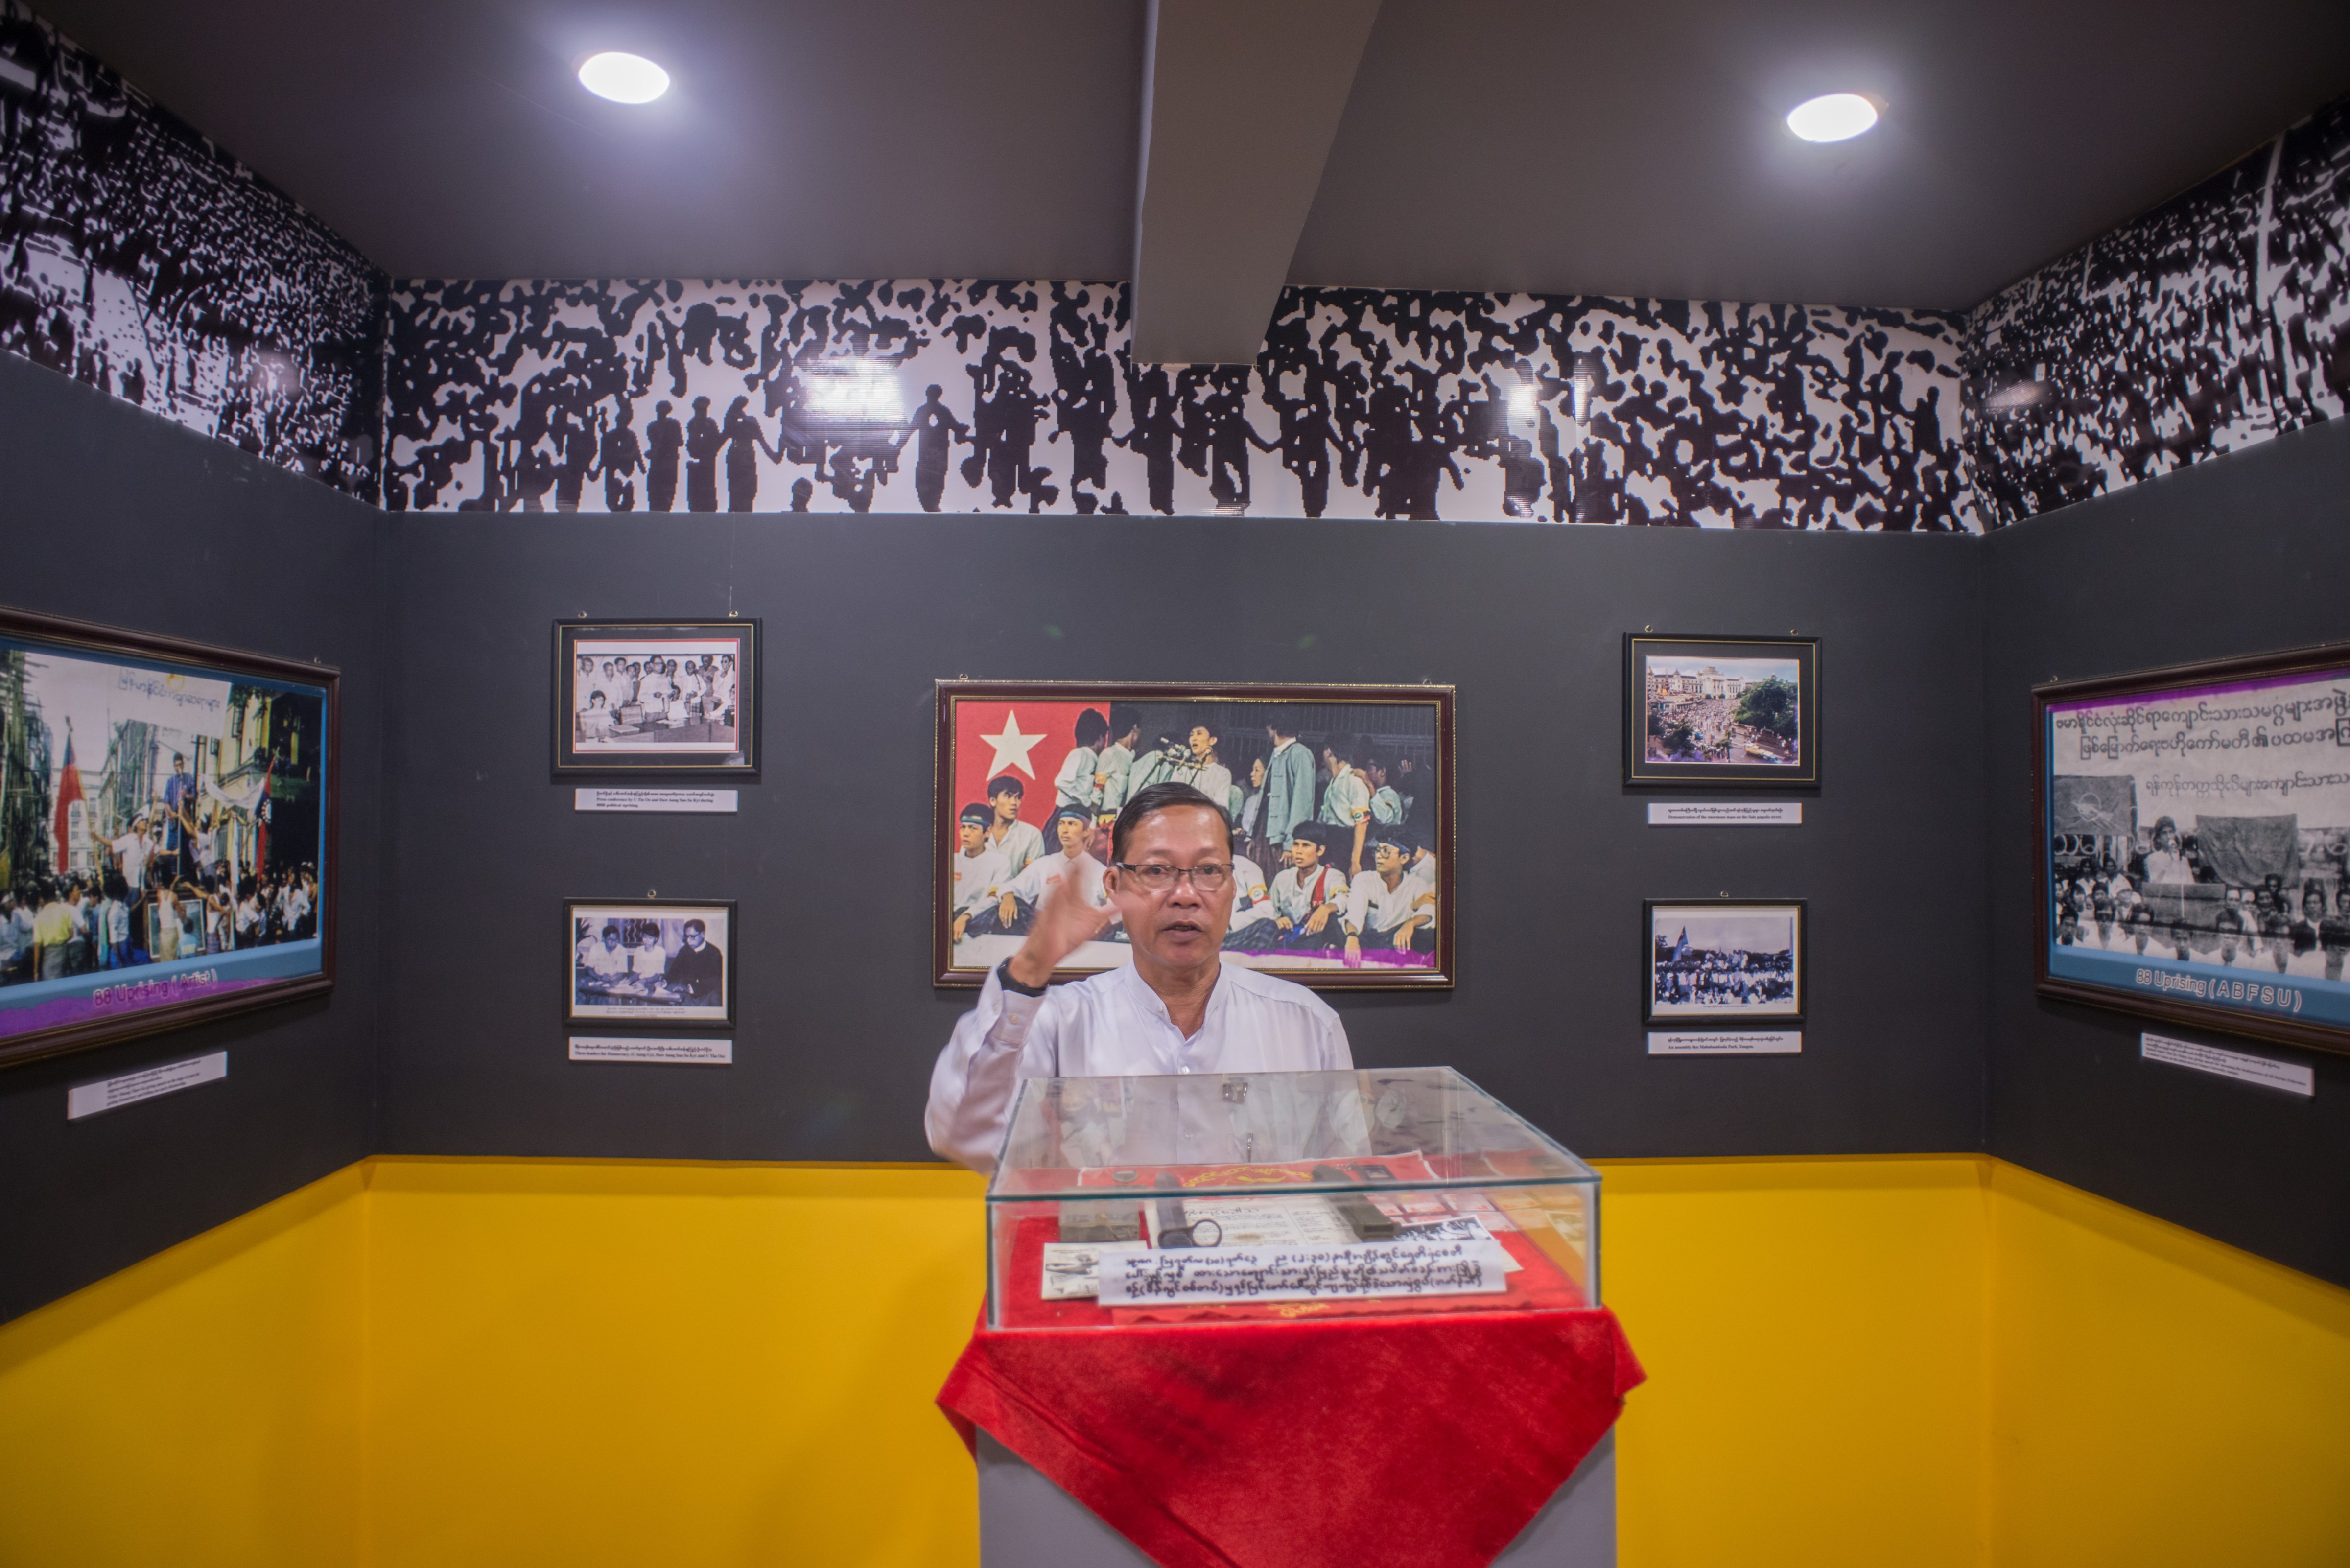 Former student activist Aung Maw speaks to visitors at the 88 Memorial Hall in Rangoon, Burma, on June 3, 2016 (Aung Naing Soe)